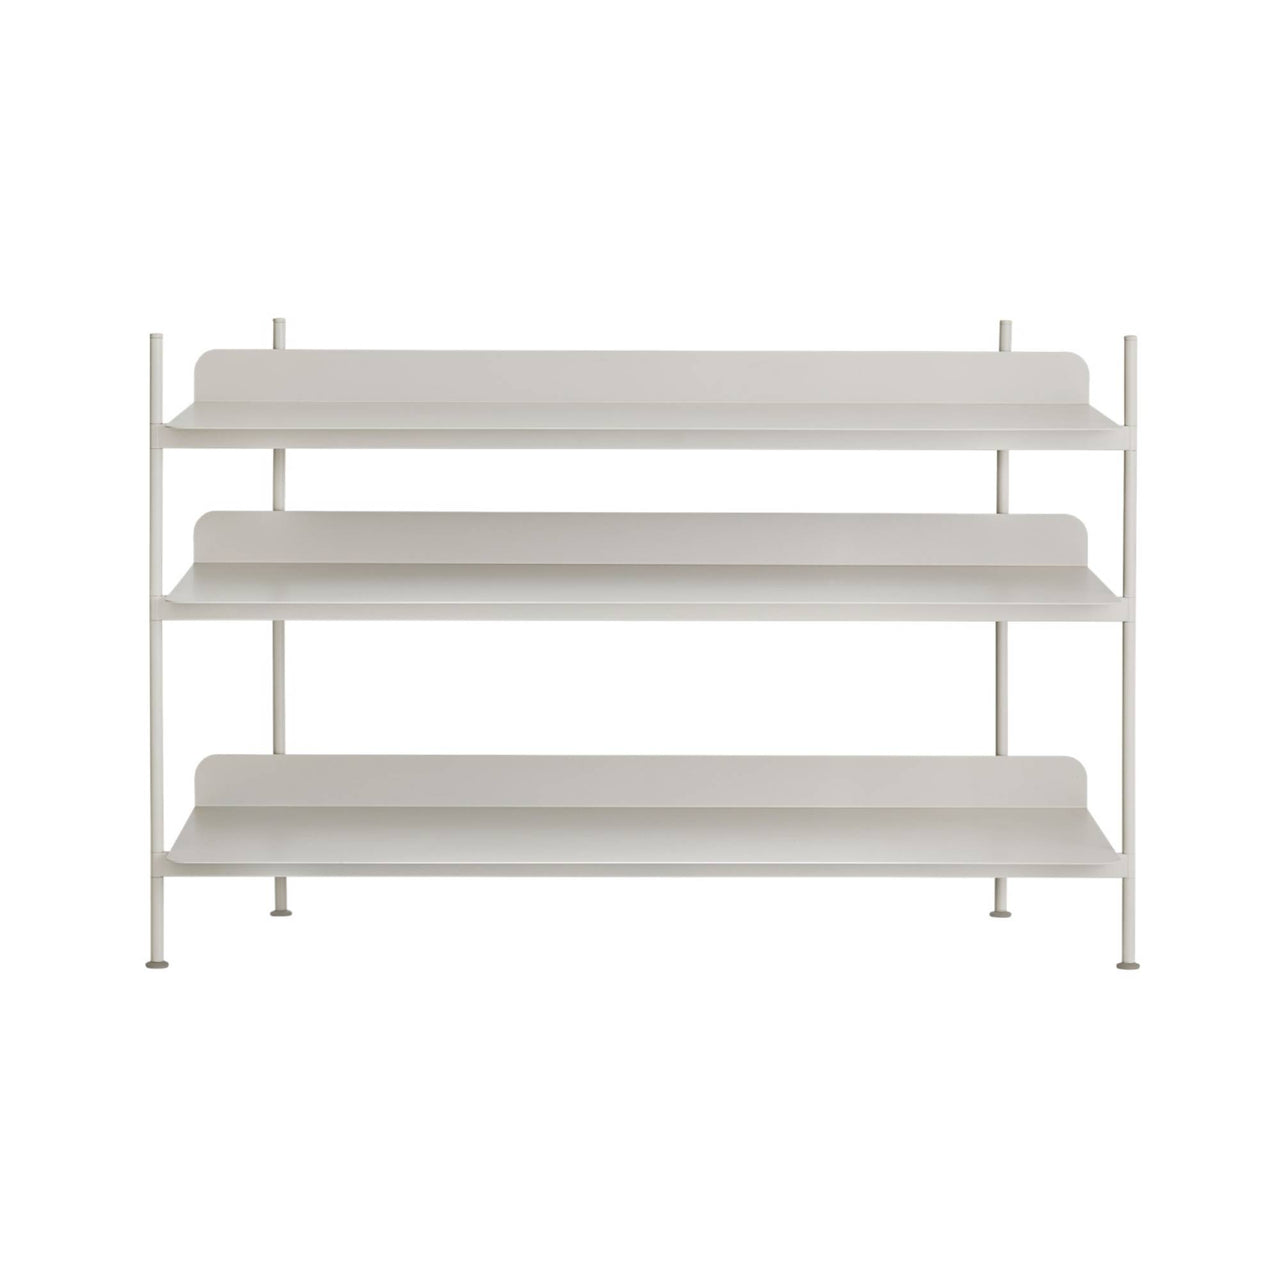 Compile Shelving System: Configuration 2 + Grey